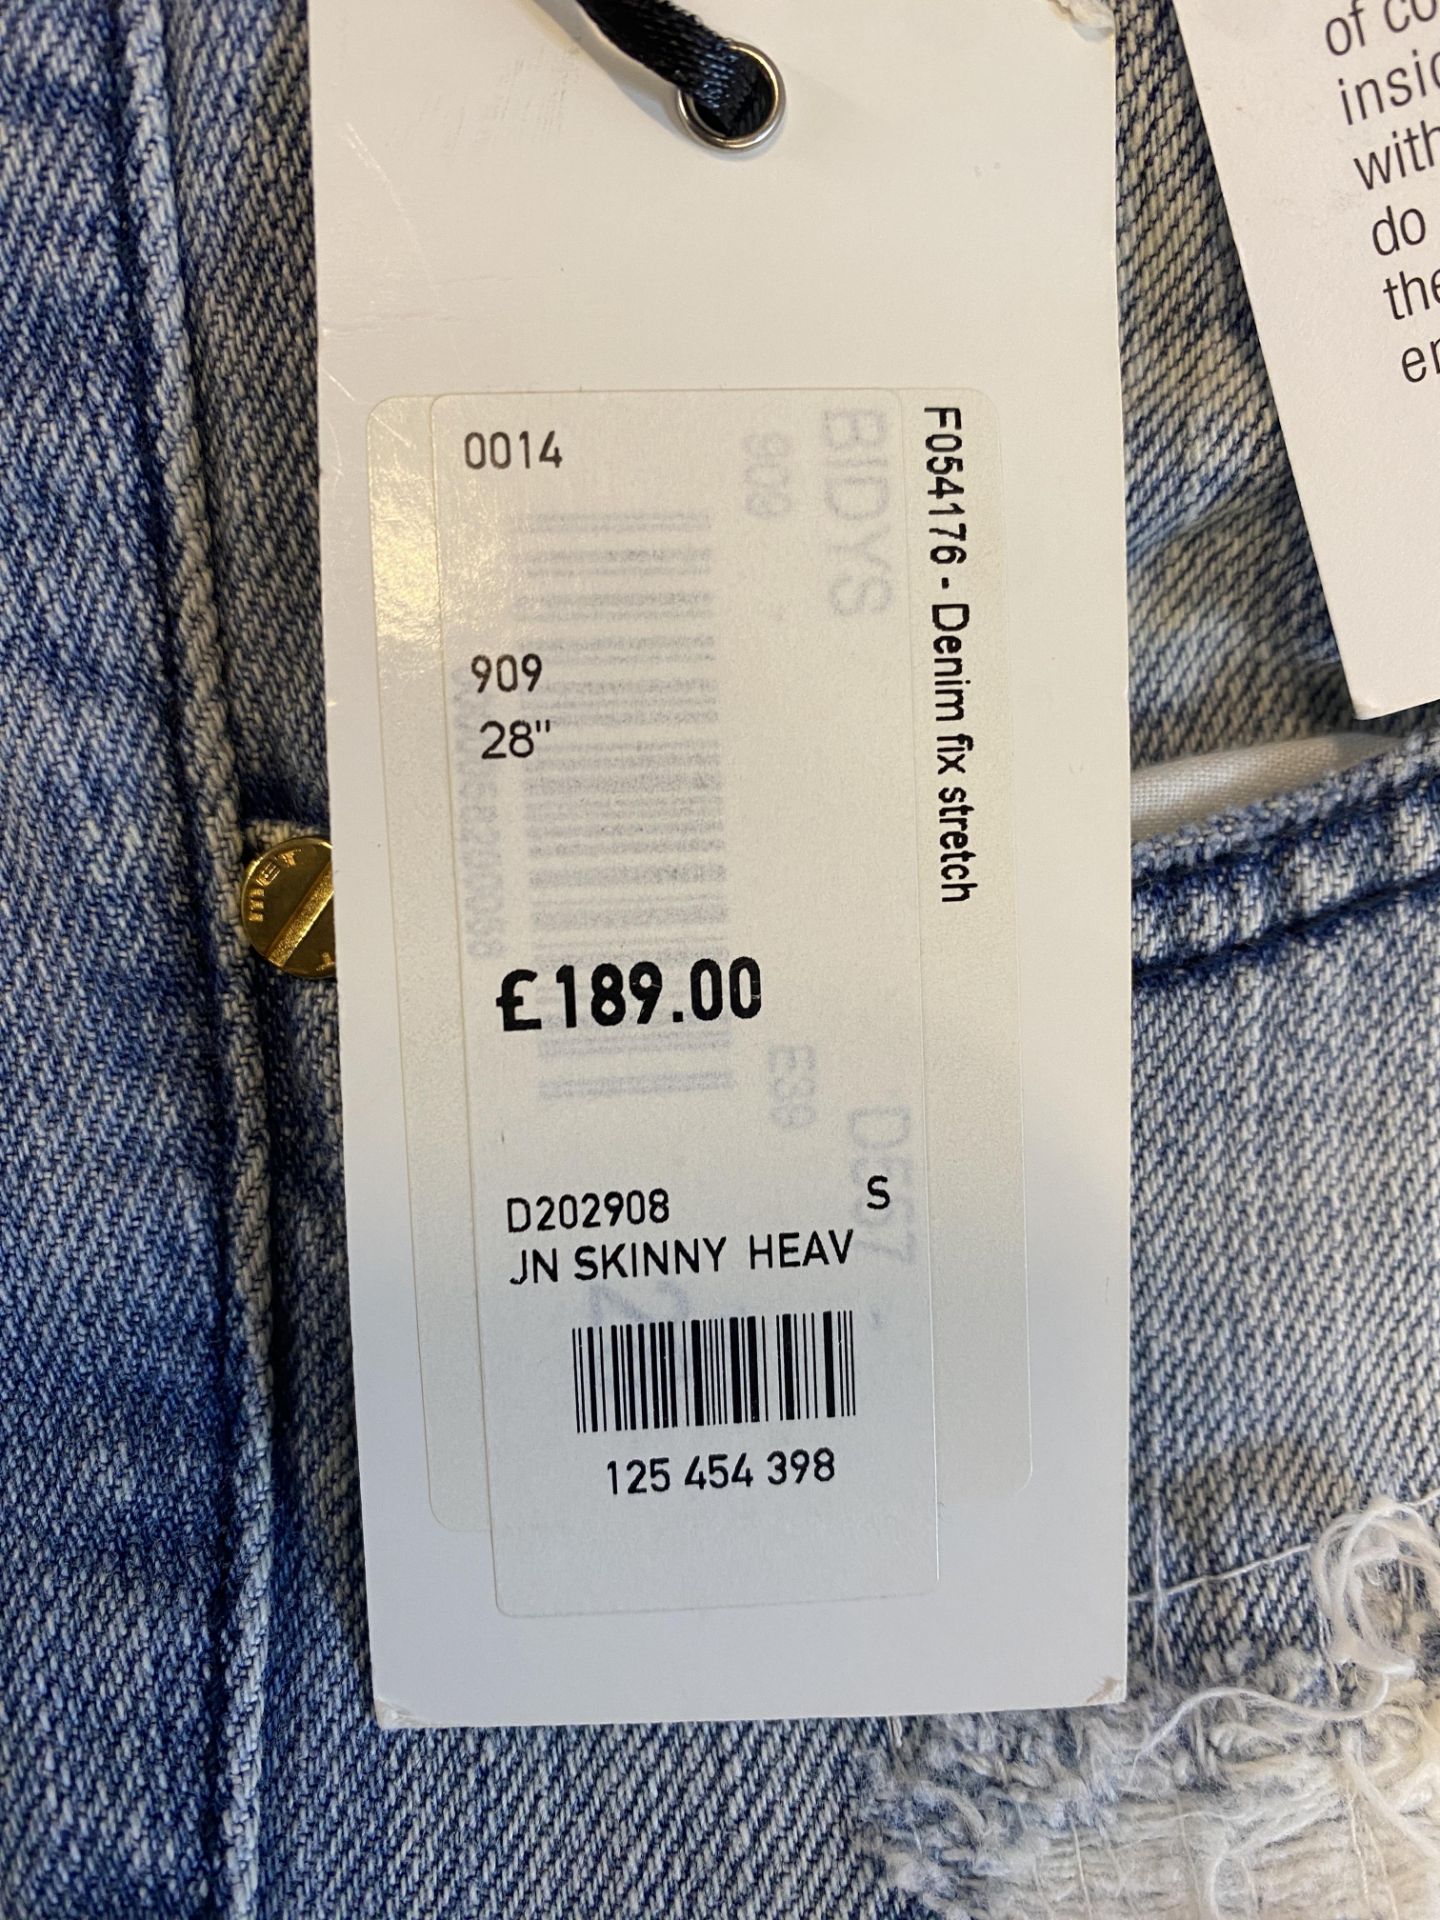 RRP £189 MET Women's Skinny Jeans, Size Small - Image 2 of 3